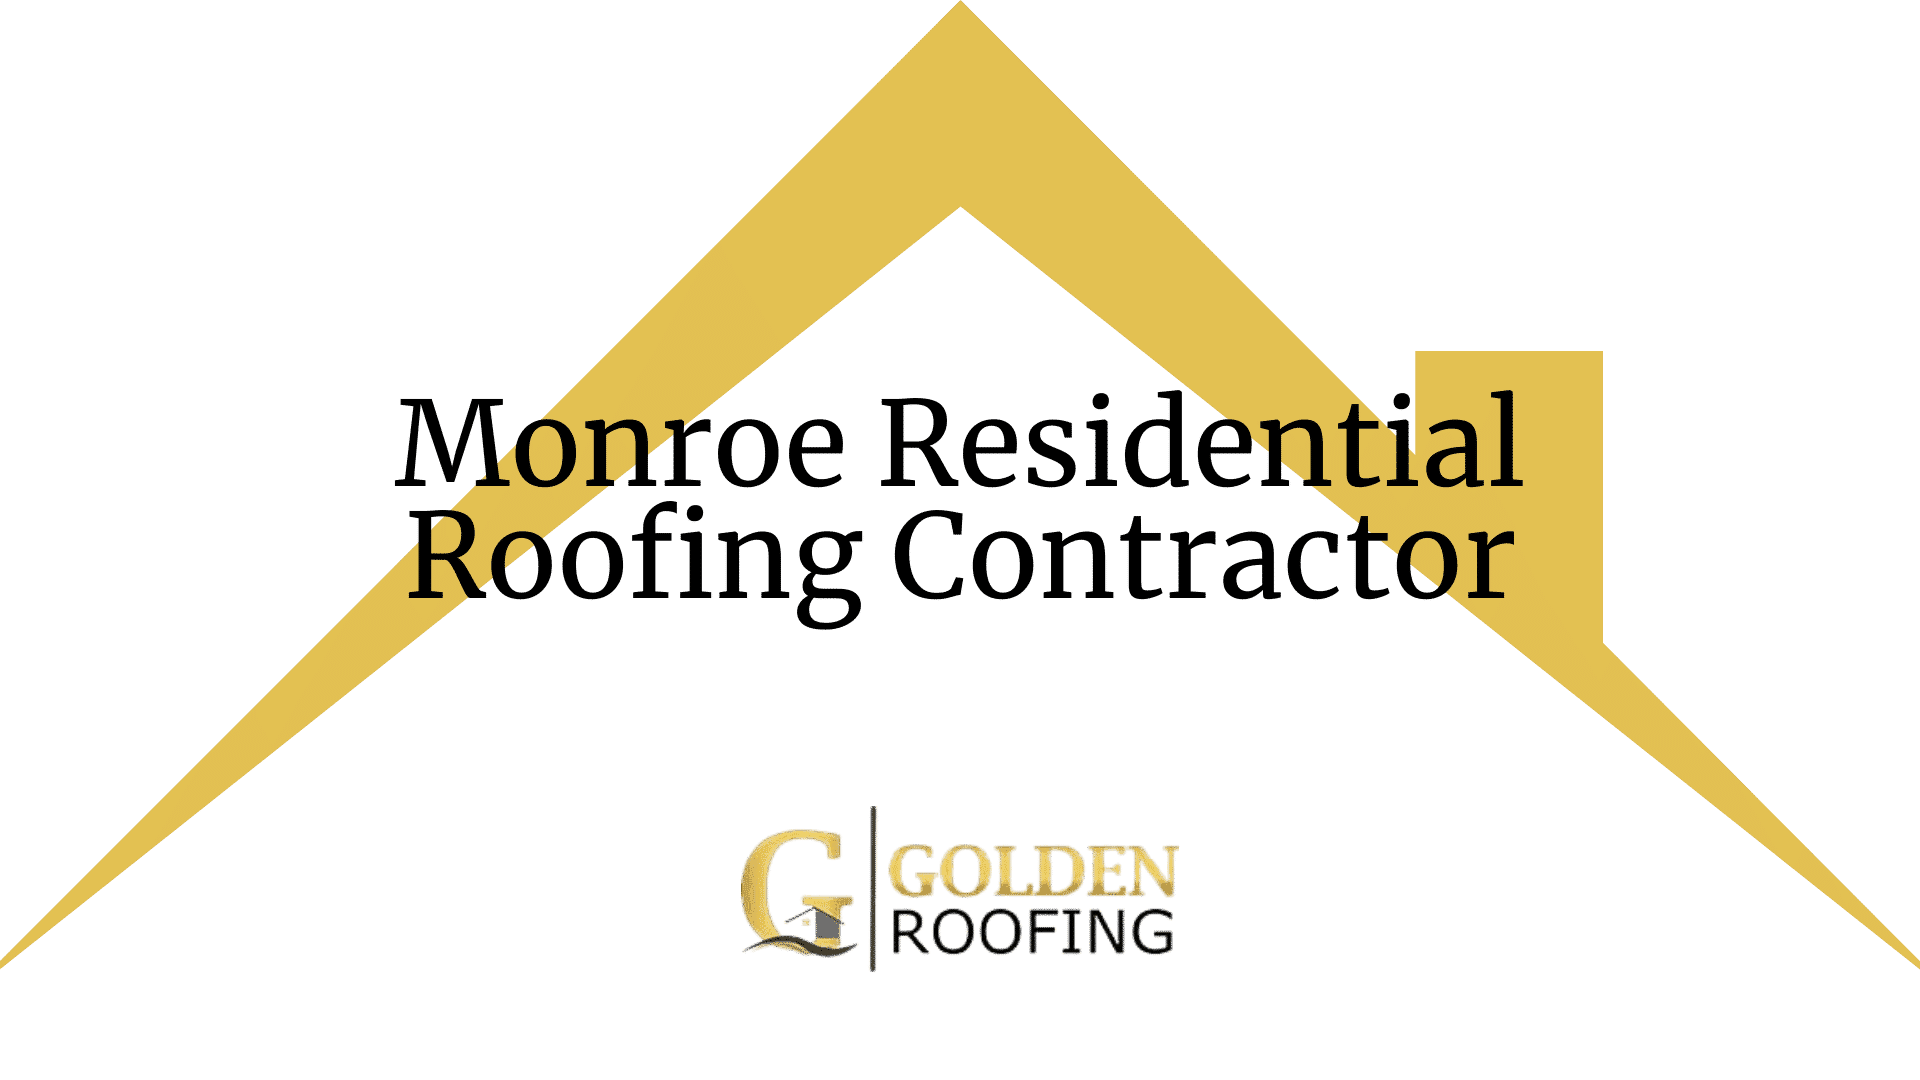 Monroe Residential Roofing Contractor